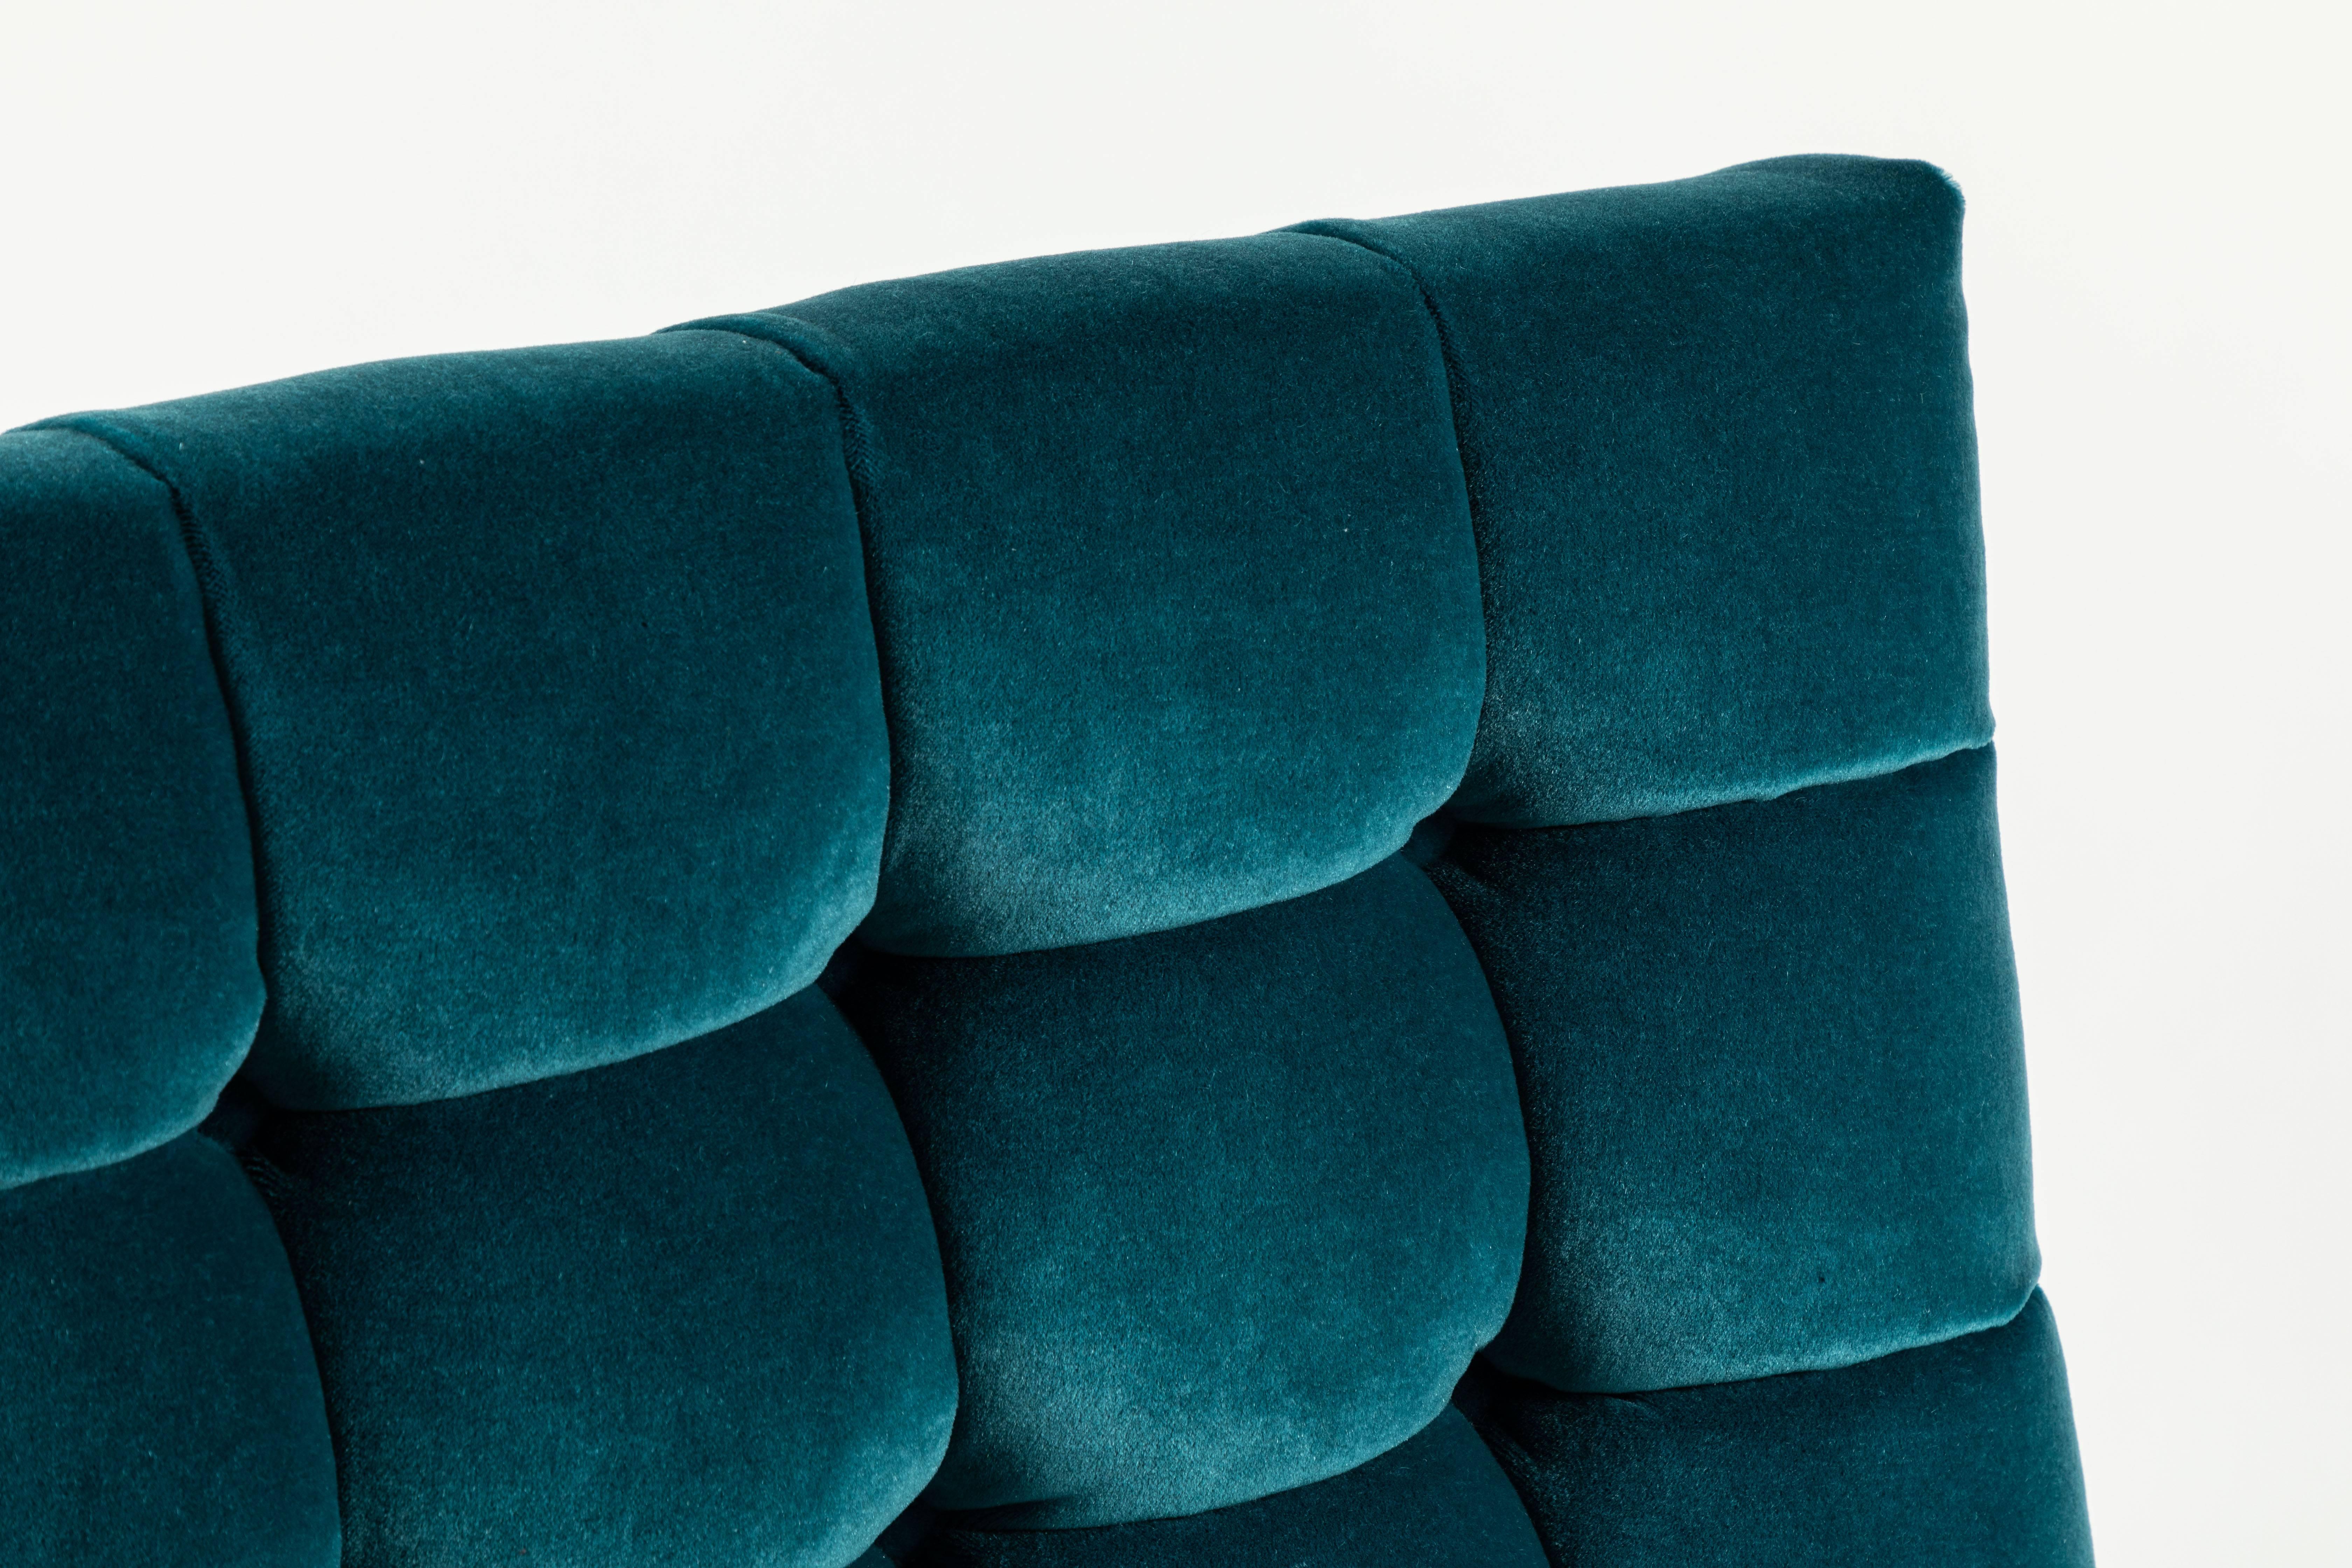 Mid-Century Modern Pair of Biscuit-Tufted Slipper Chairs Covered in Teal Mohair